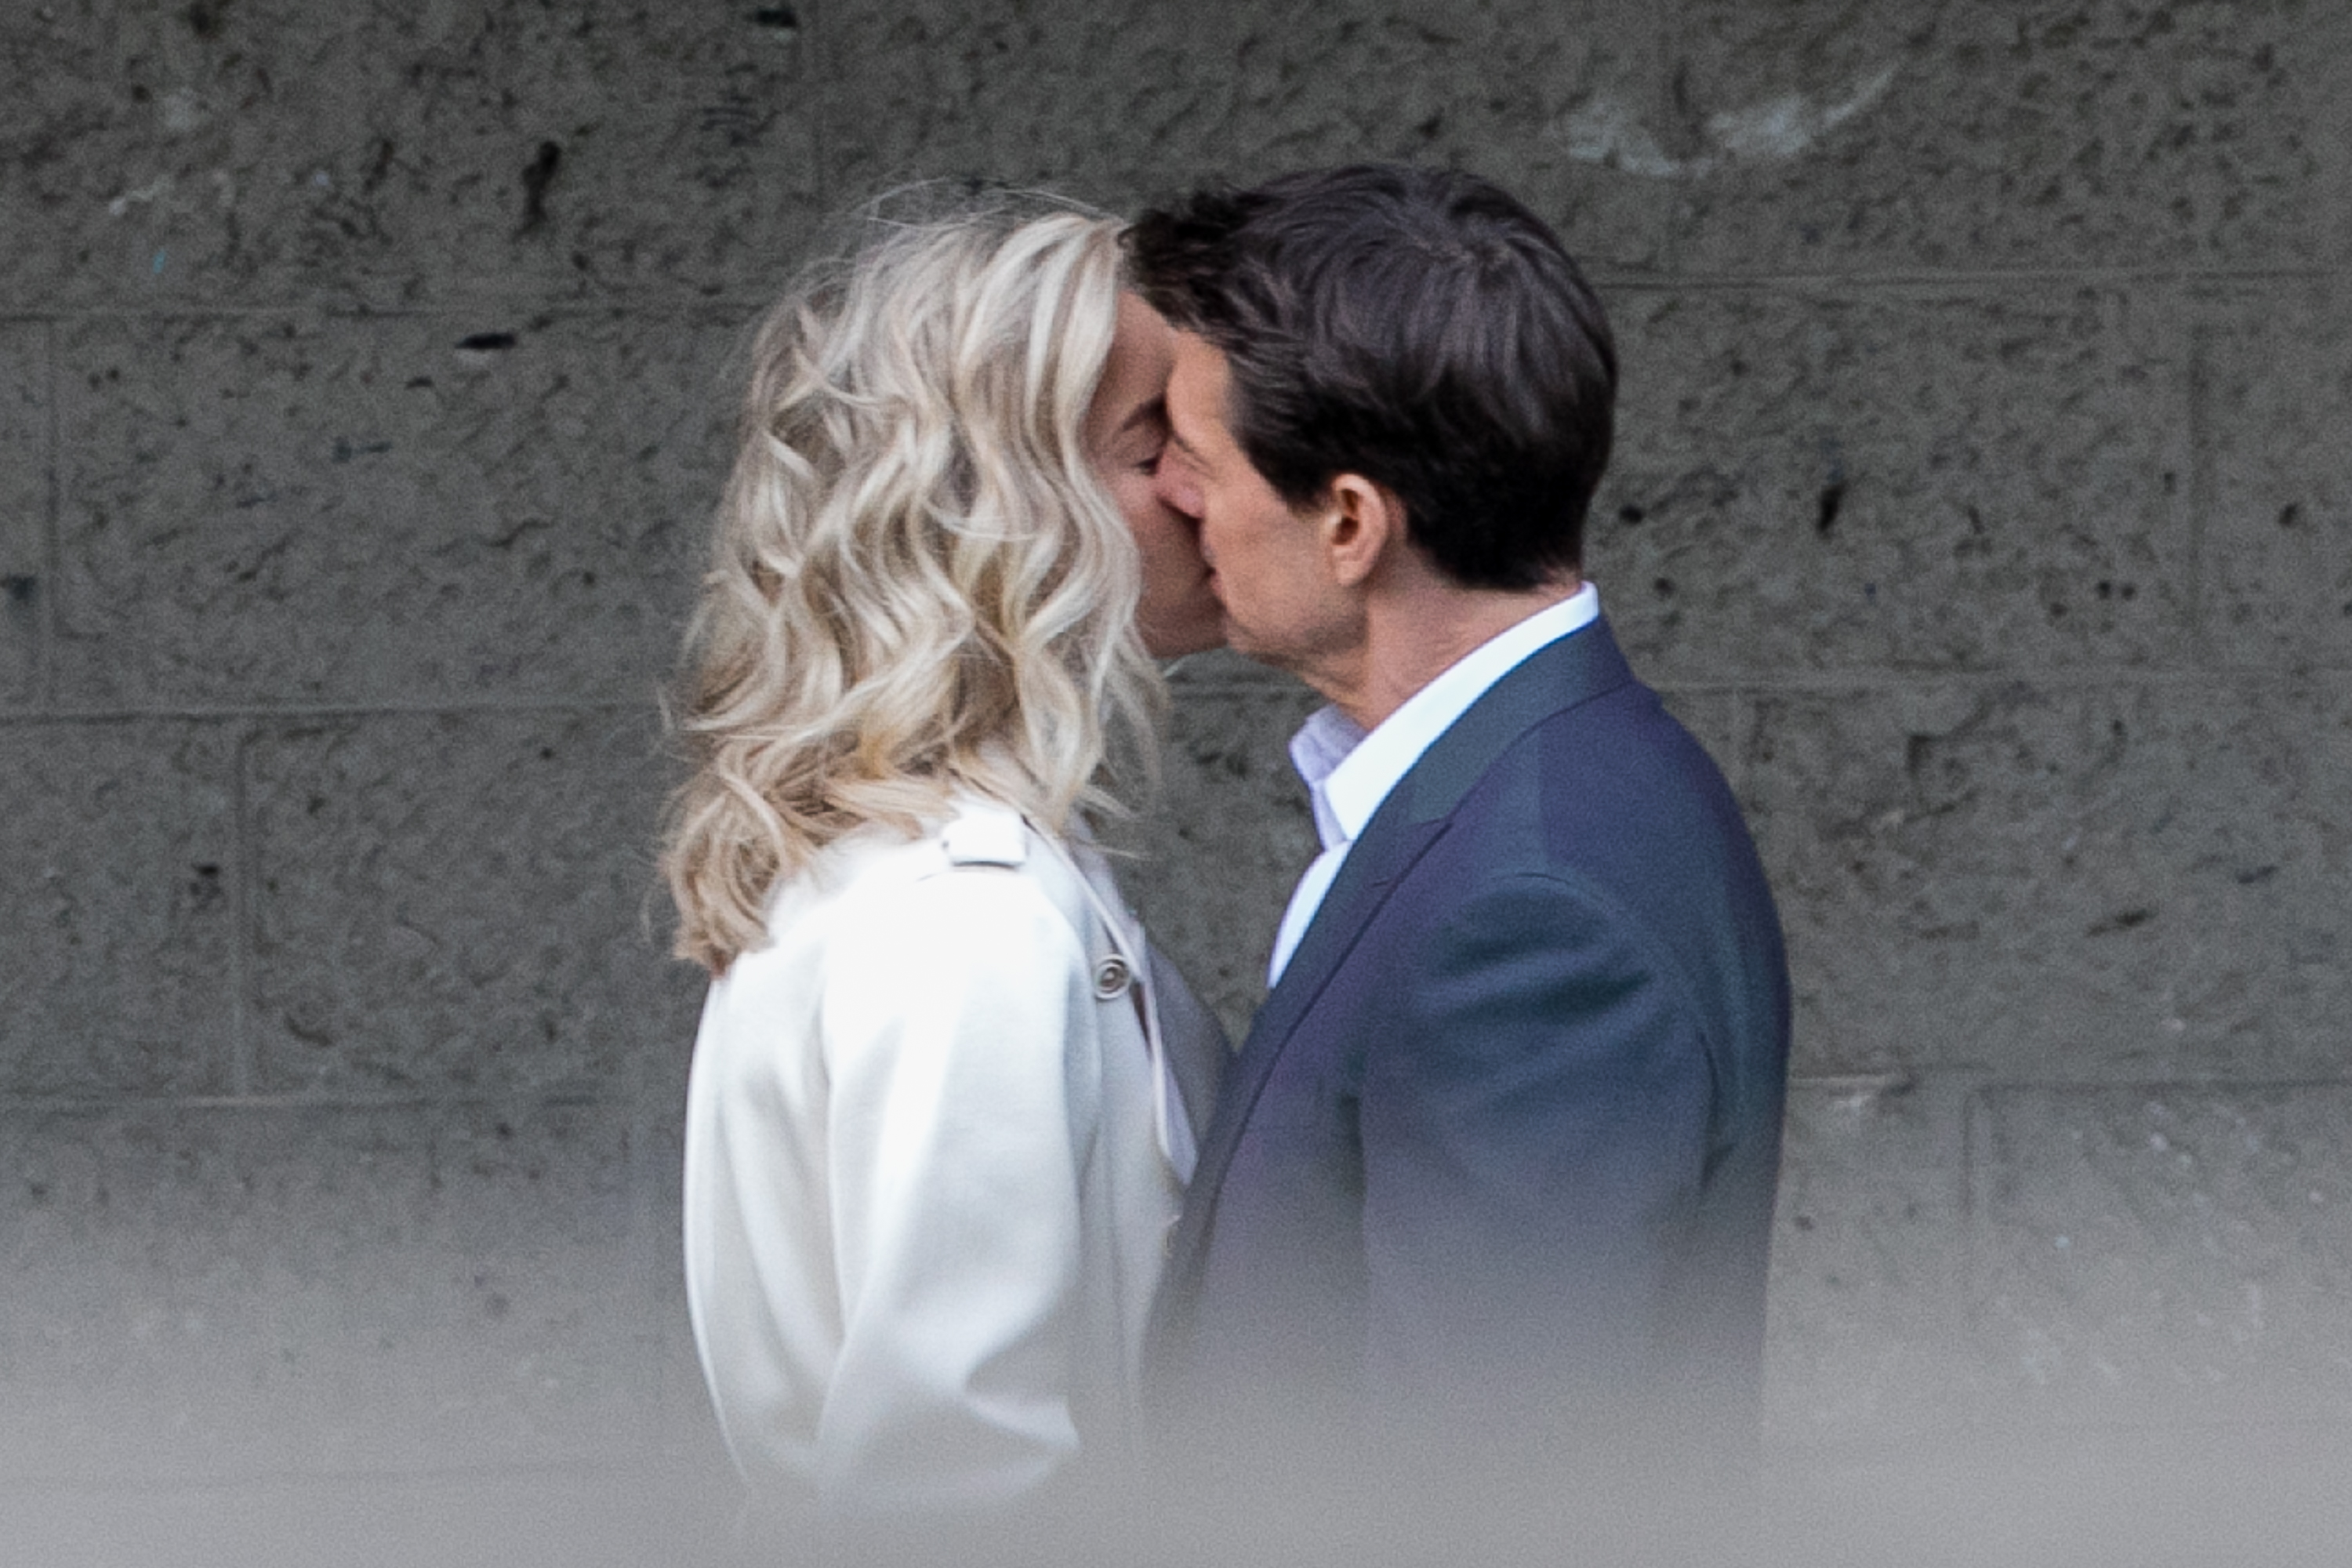 Vanessa Kirby and Tom Cruise kissing on the "Mission: Impossible 6 Gemini" set in Paris, France, on May 2, 2017. | Source: Getty Images